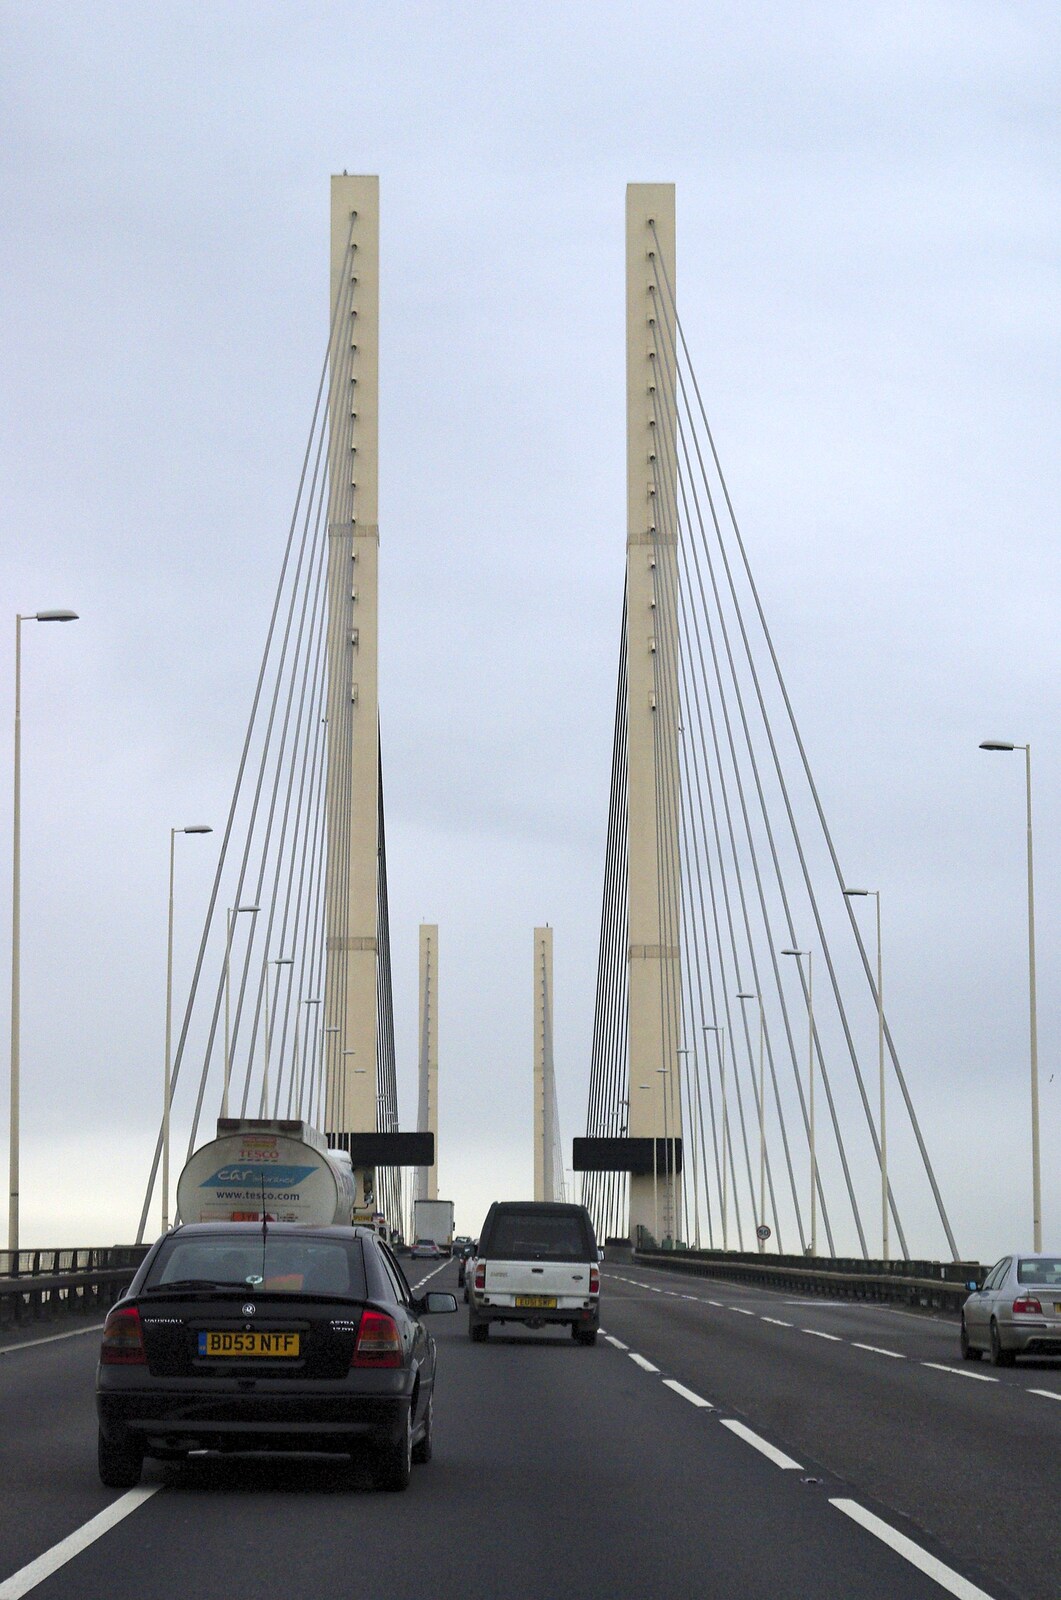 The BBs On Tour, Gatwick Copthorne, West Sussex - 24th November 2007: The QE2 bridge on the Dartford Crossing